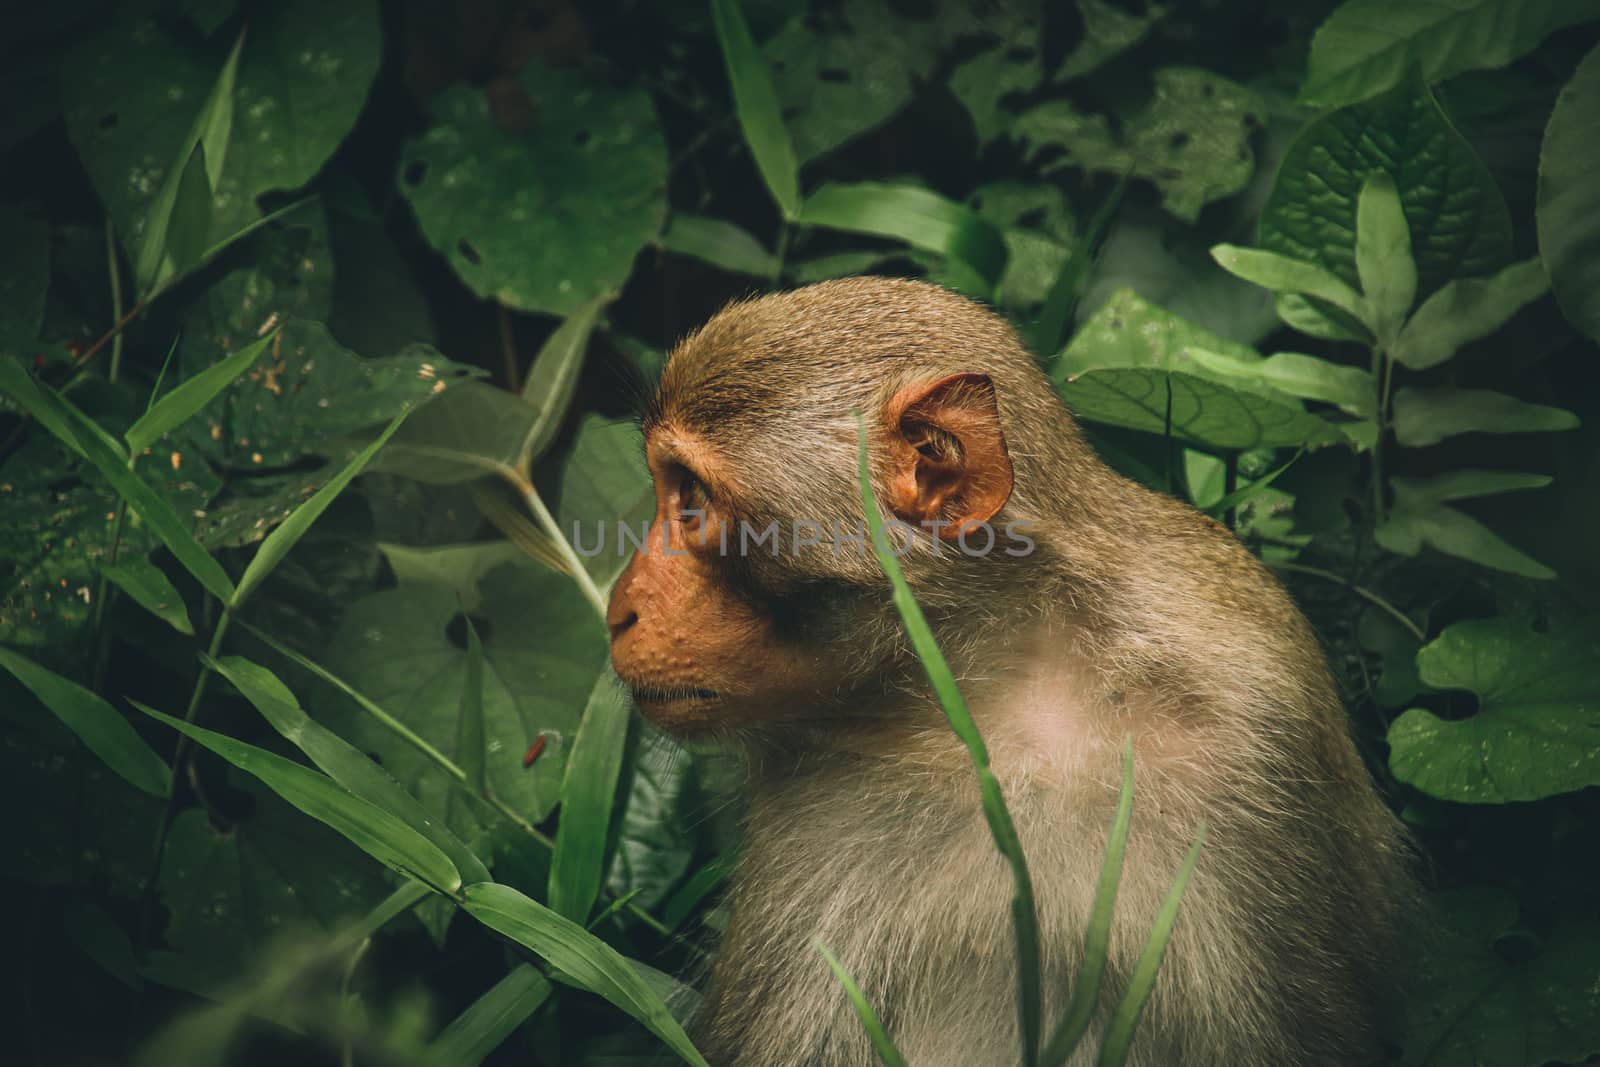 Northern pig-tailed macaque monkey by Sonnet15